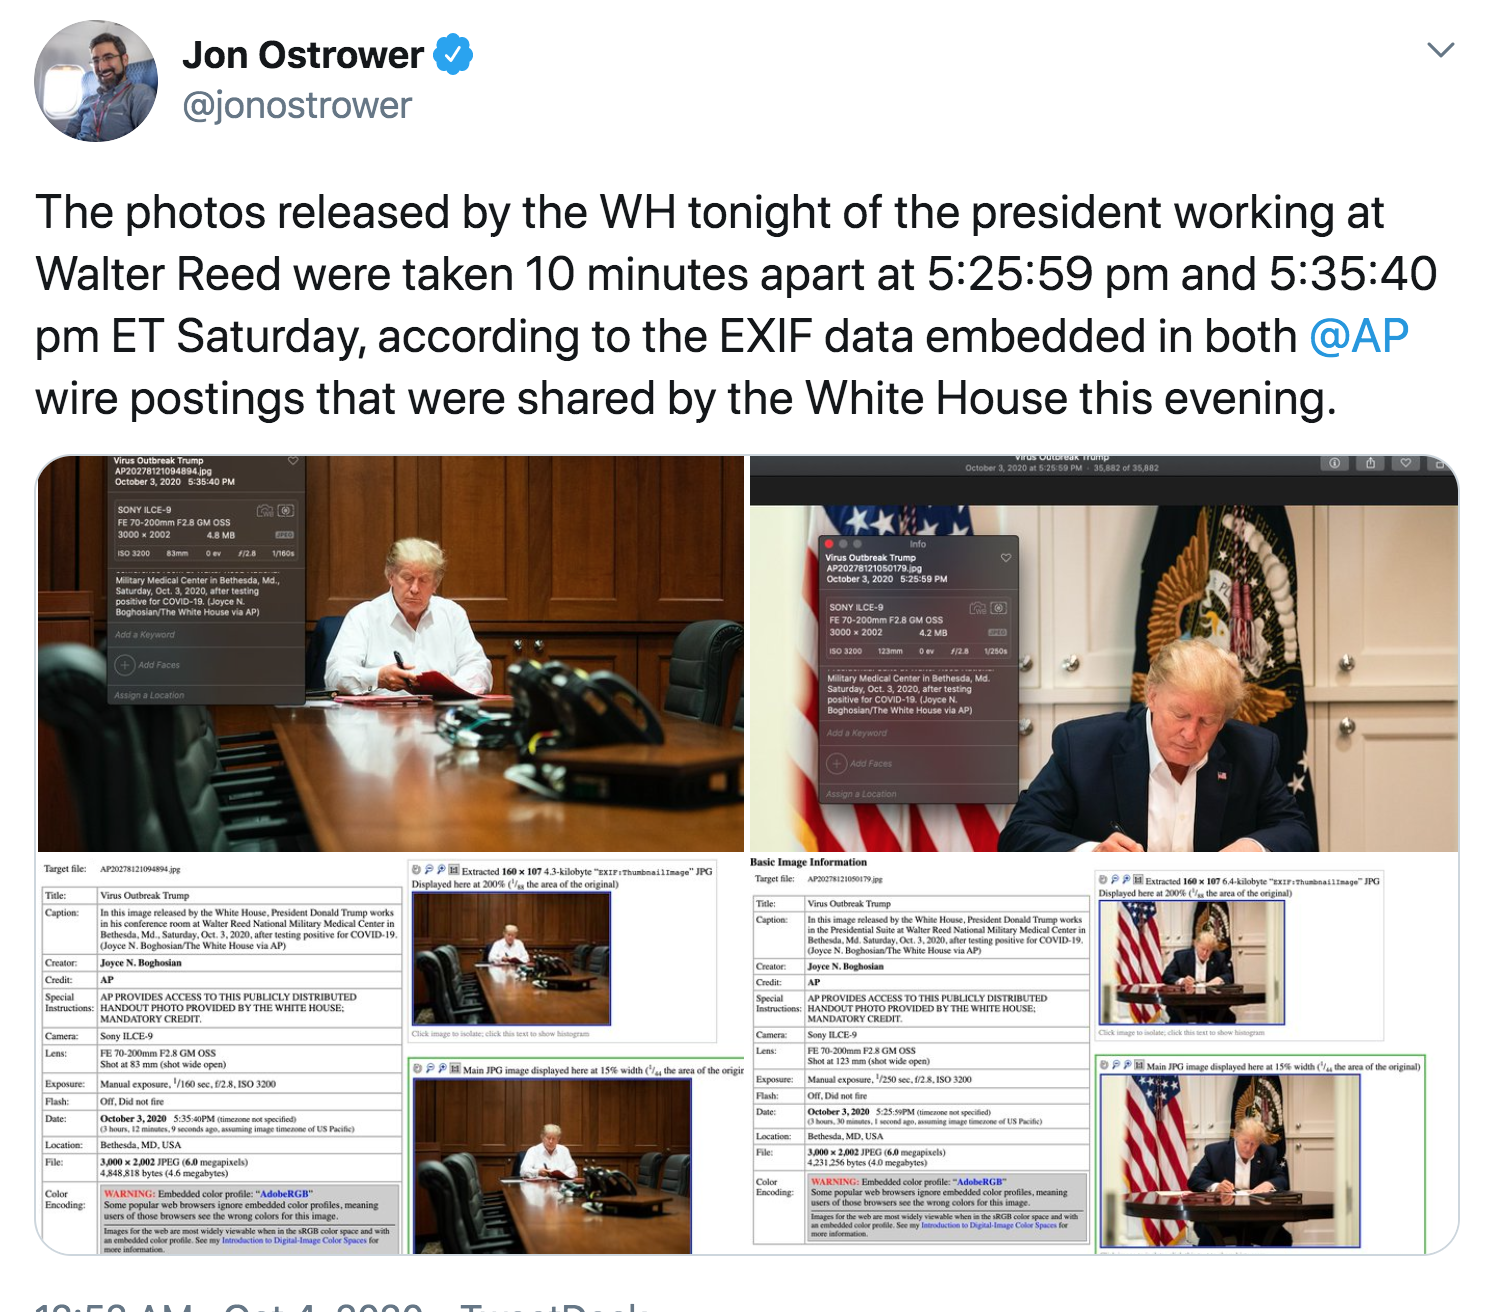 media - Jon Ostrower The photos released by the Wh tonight of the president working at Walter Reed were taken 10 minutes apart at 59 pm and 40 pm Et Saturday, according to the Exif data embedded in both wire postings that were d by the White House this ev